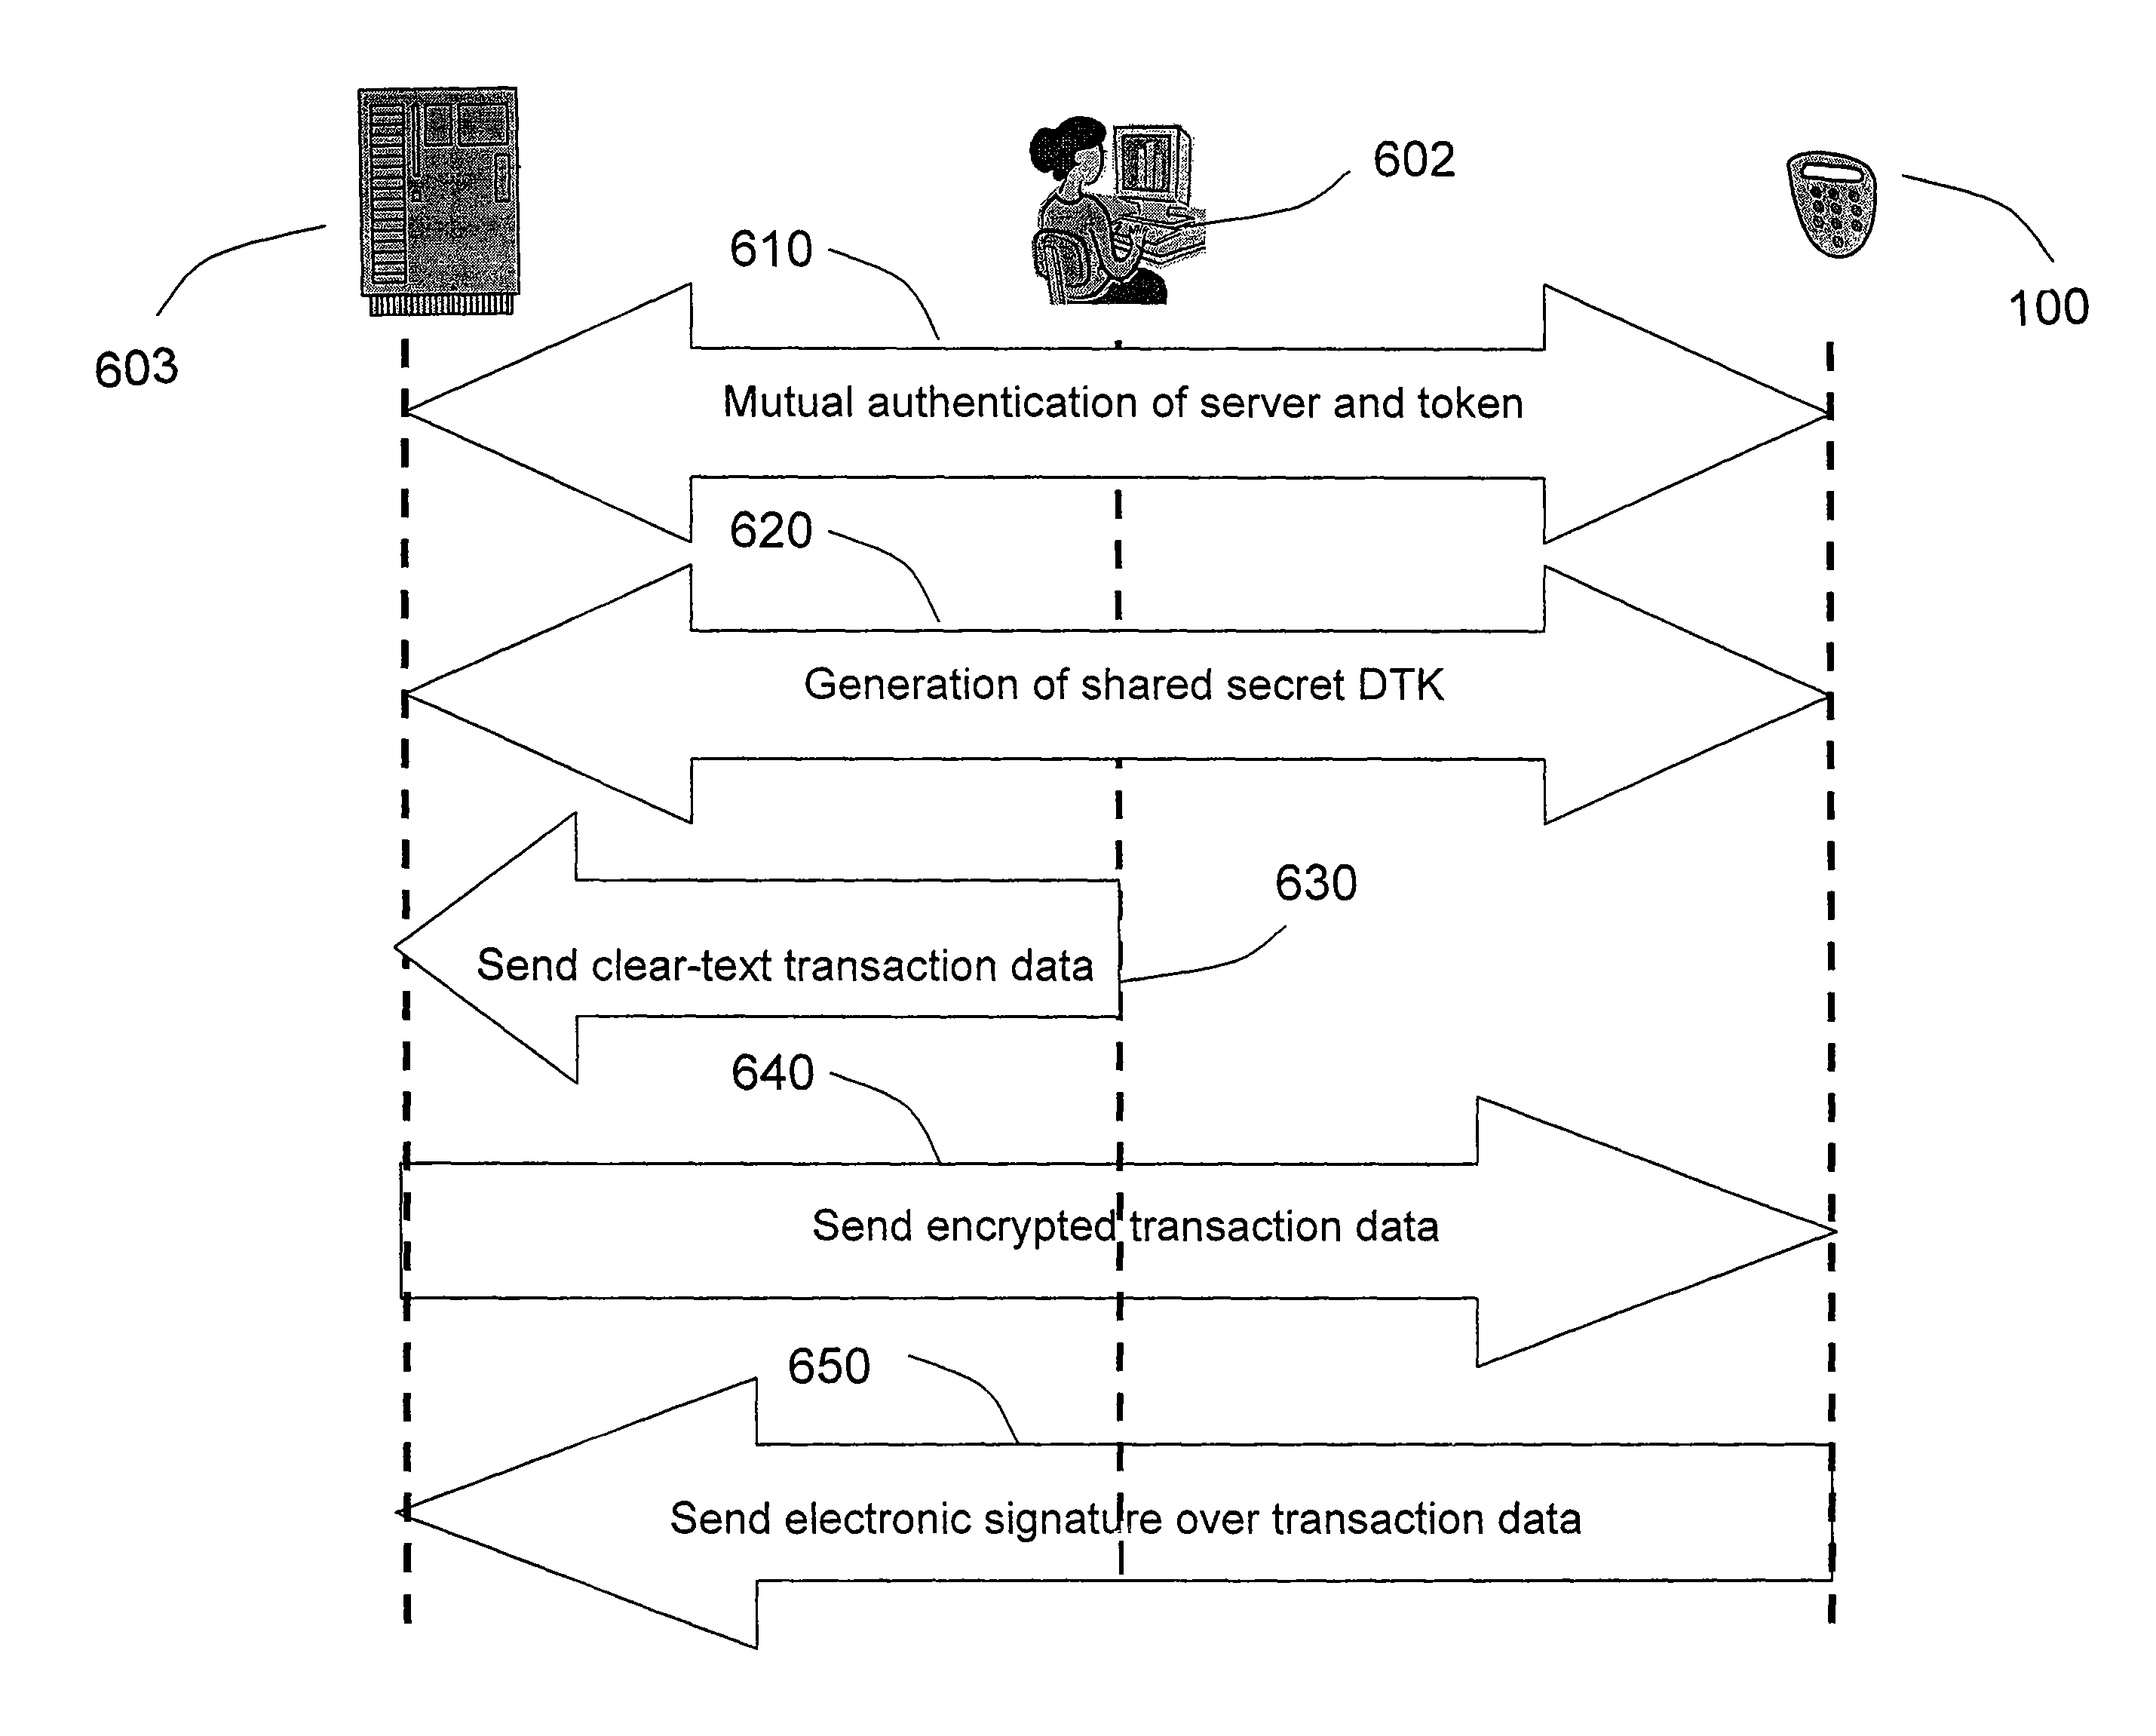 Strong authentication token generating one-time passwords and signatures upon server credential verification